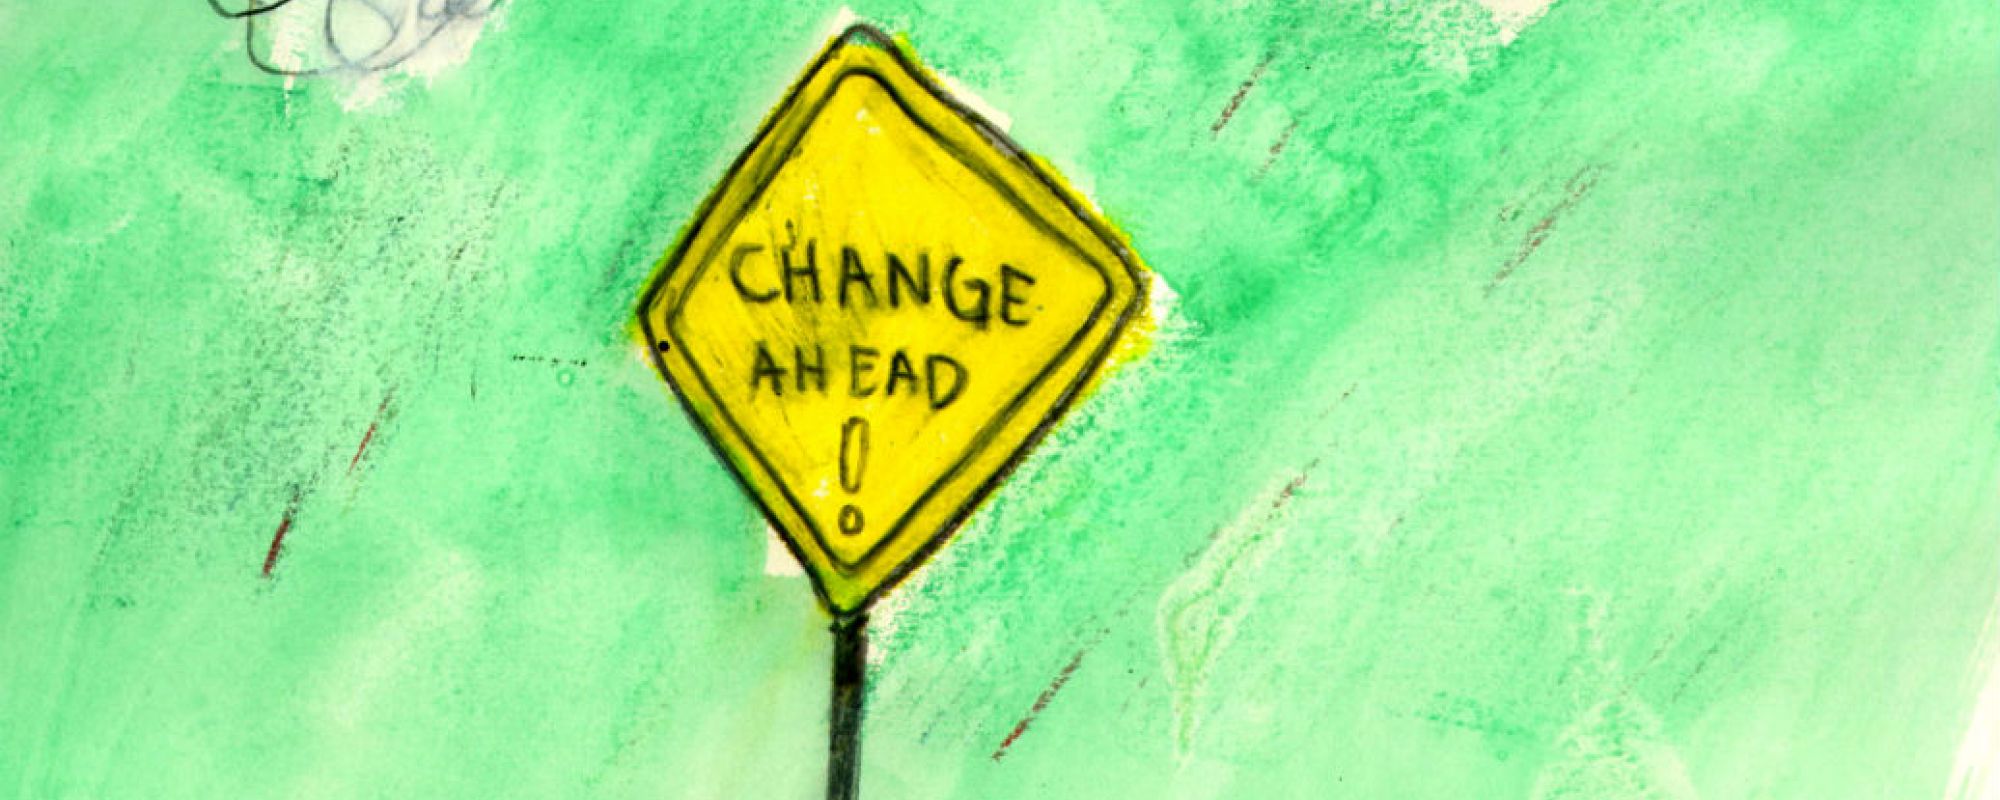 Road sign reading "Change Ahead"